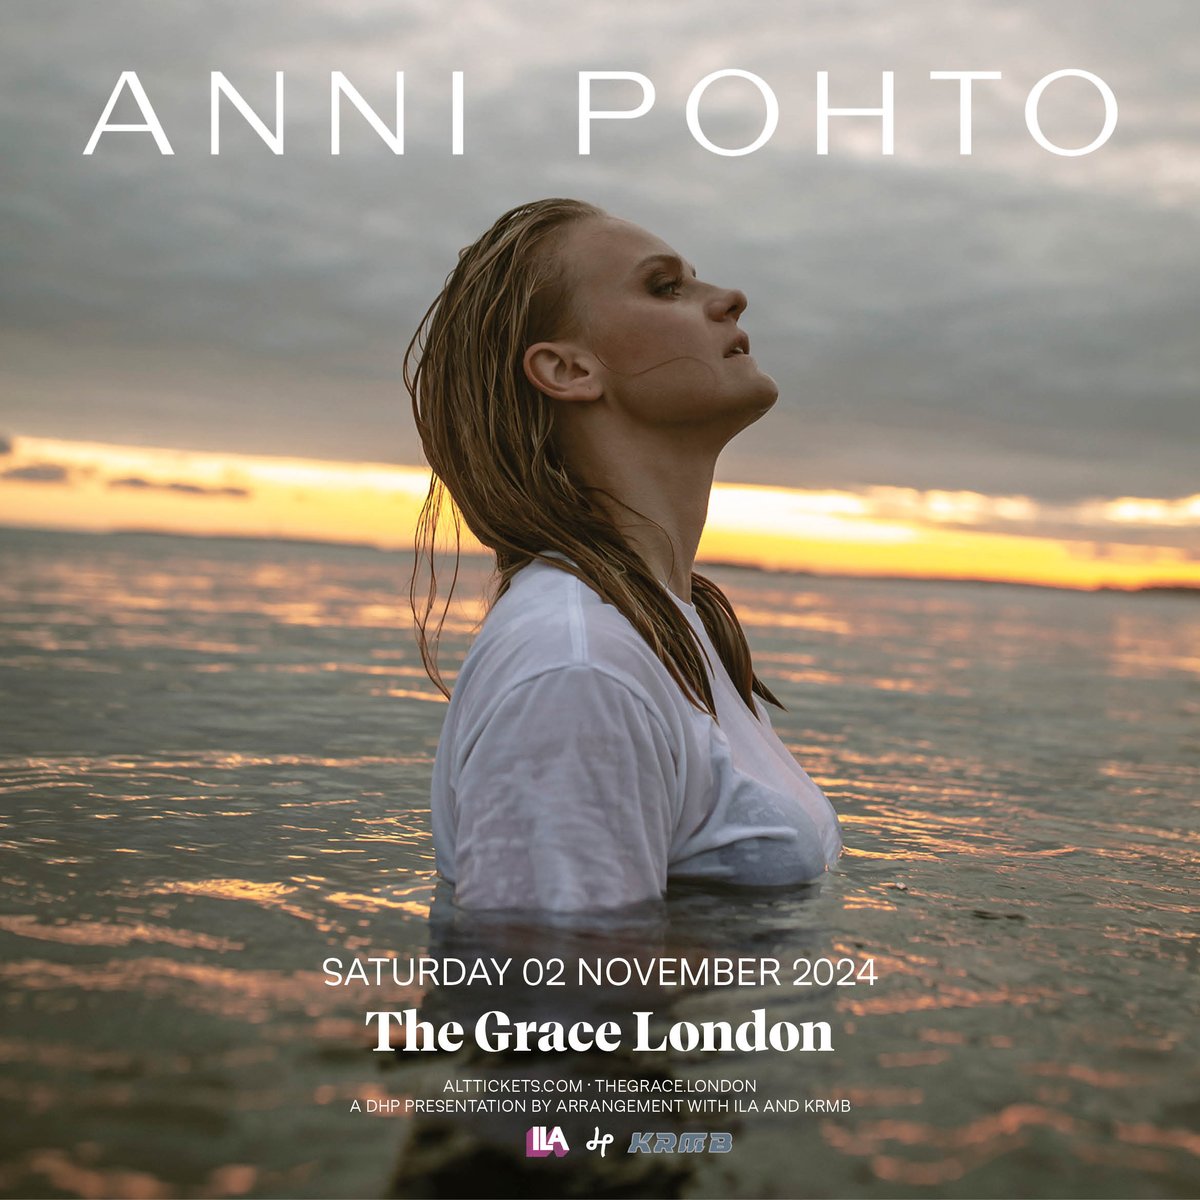 Get ready... tickets are now on sale for ANNI POHTO this July! 📅 Saturday 02 November 2024 🎟️ Get yours here 👉 ticketweb.uk/event/anni-poh…